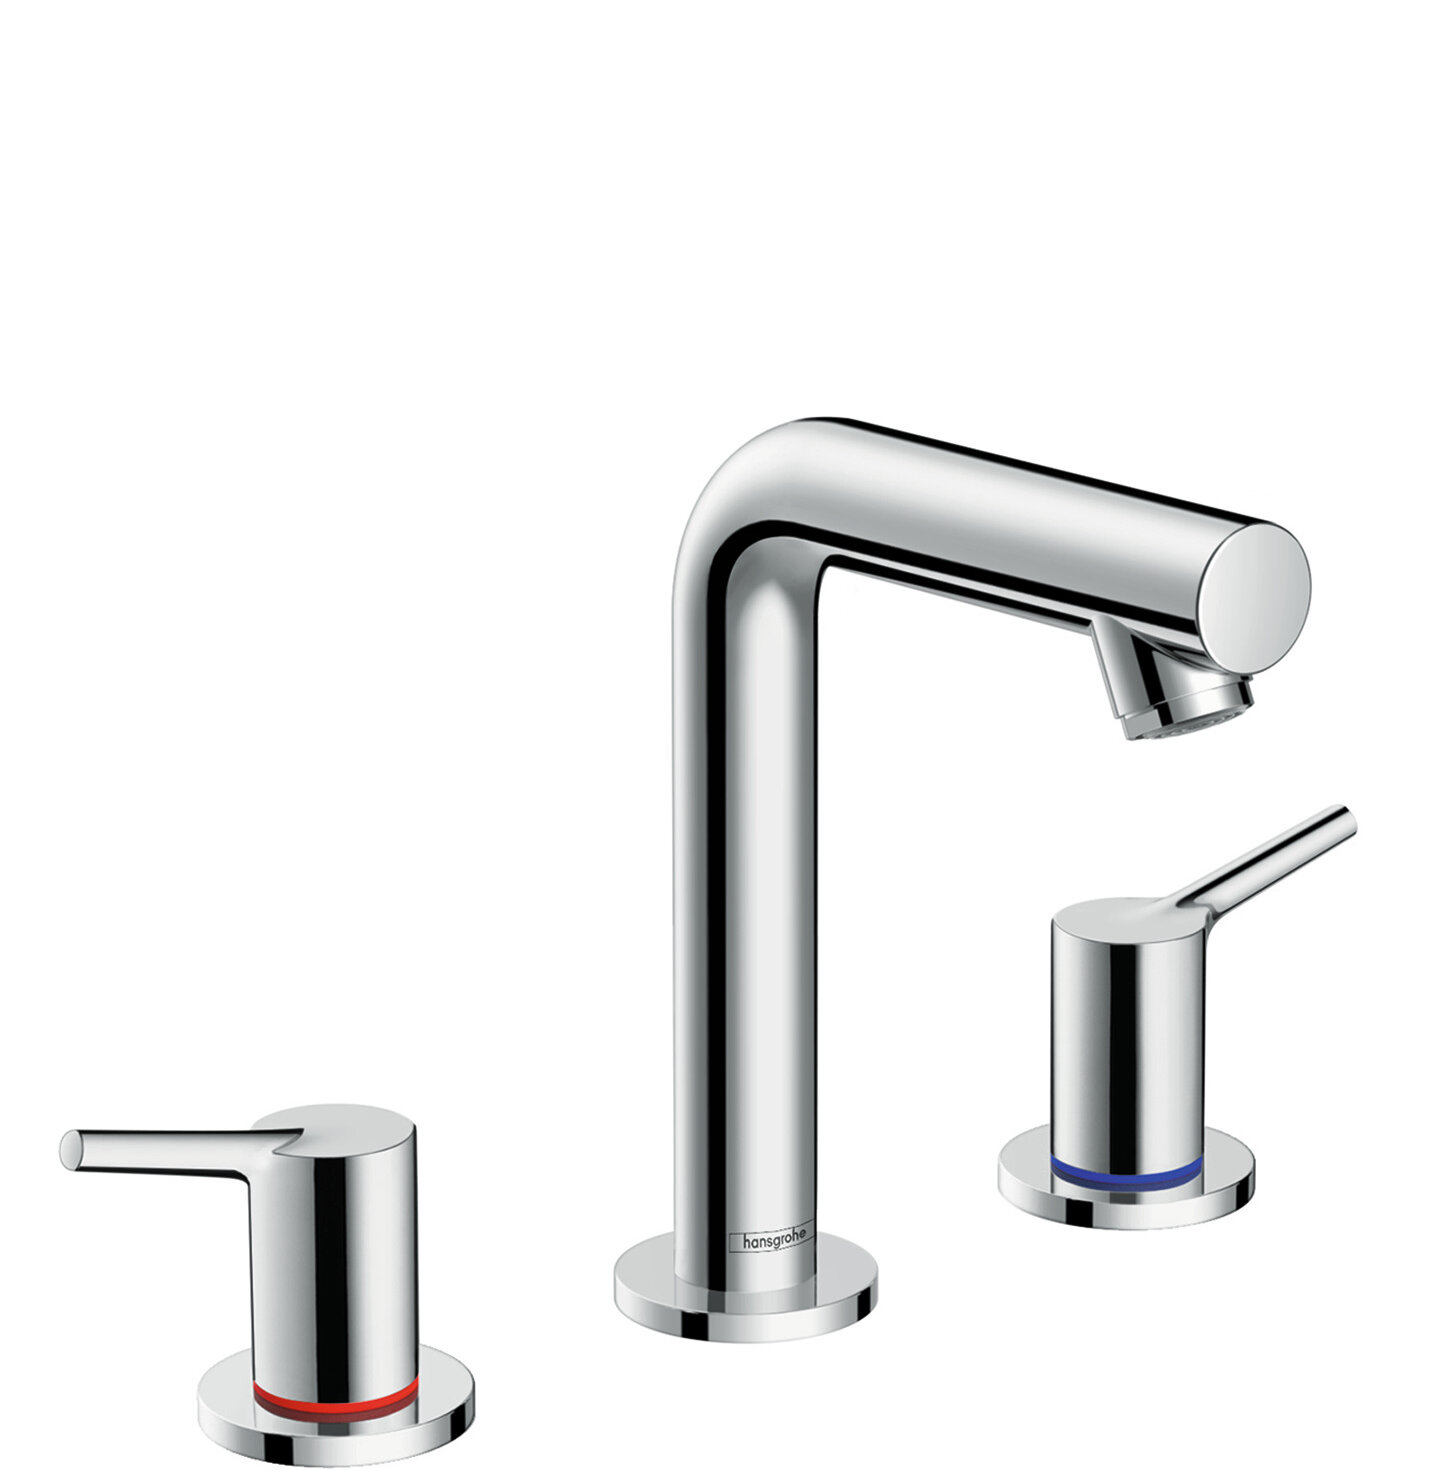 Hansgrohe Talis S Premium Widespread Bathroom Faucet With Drain Assembly Wayfair